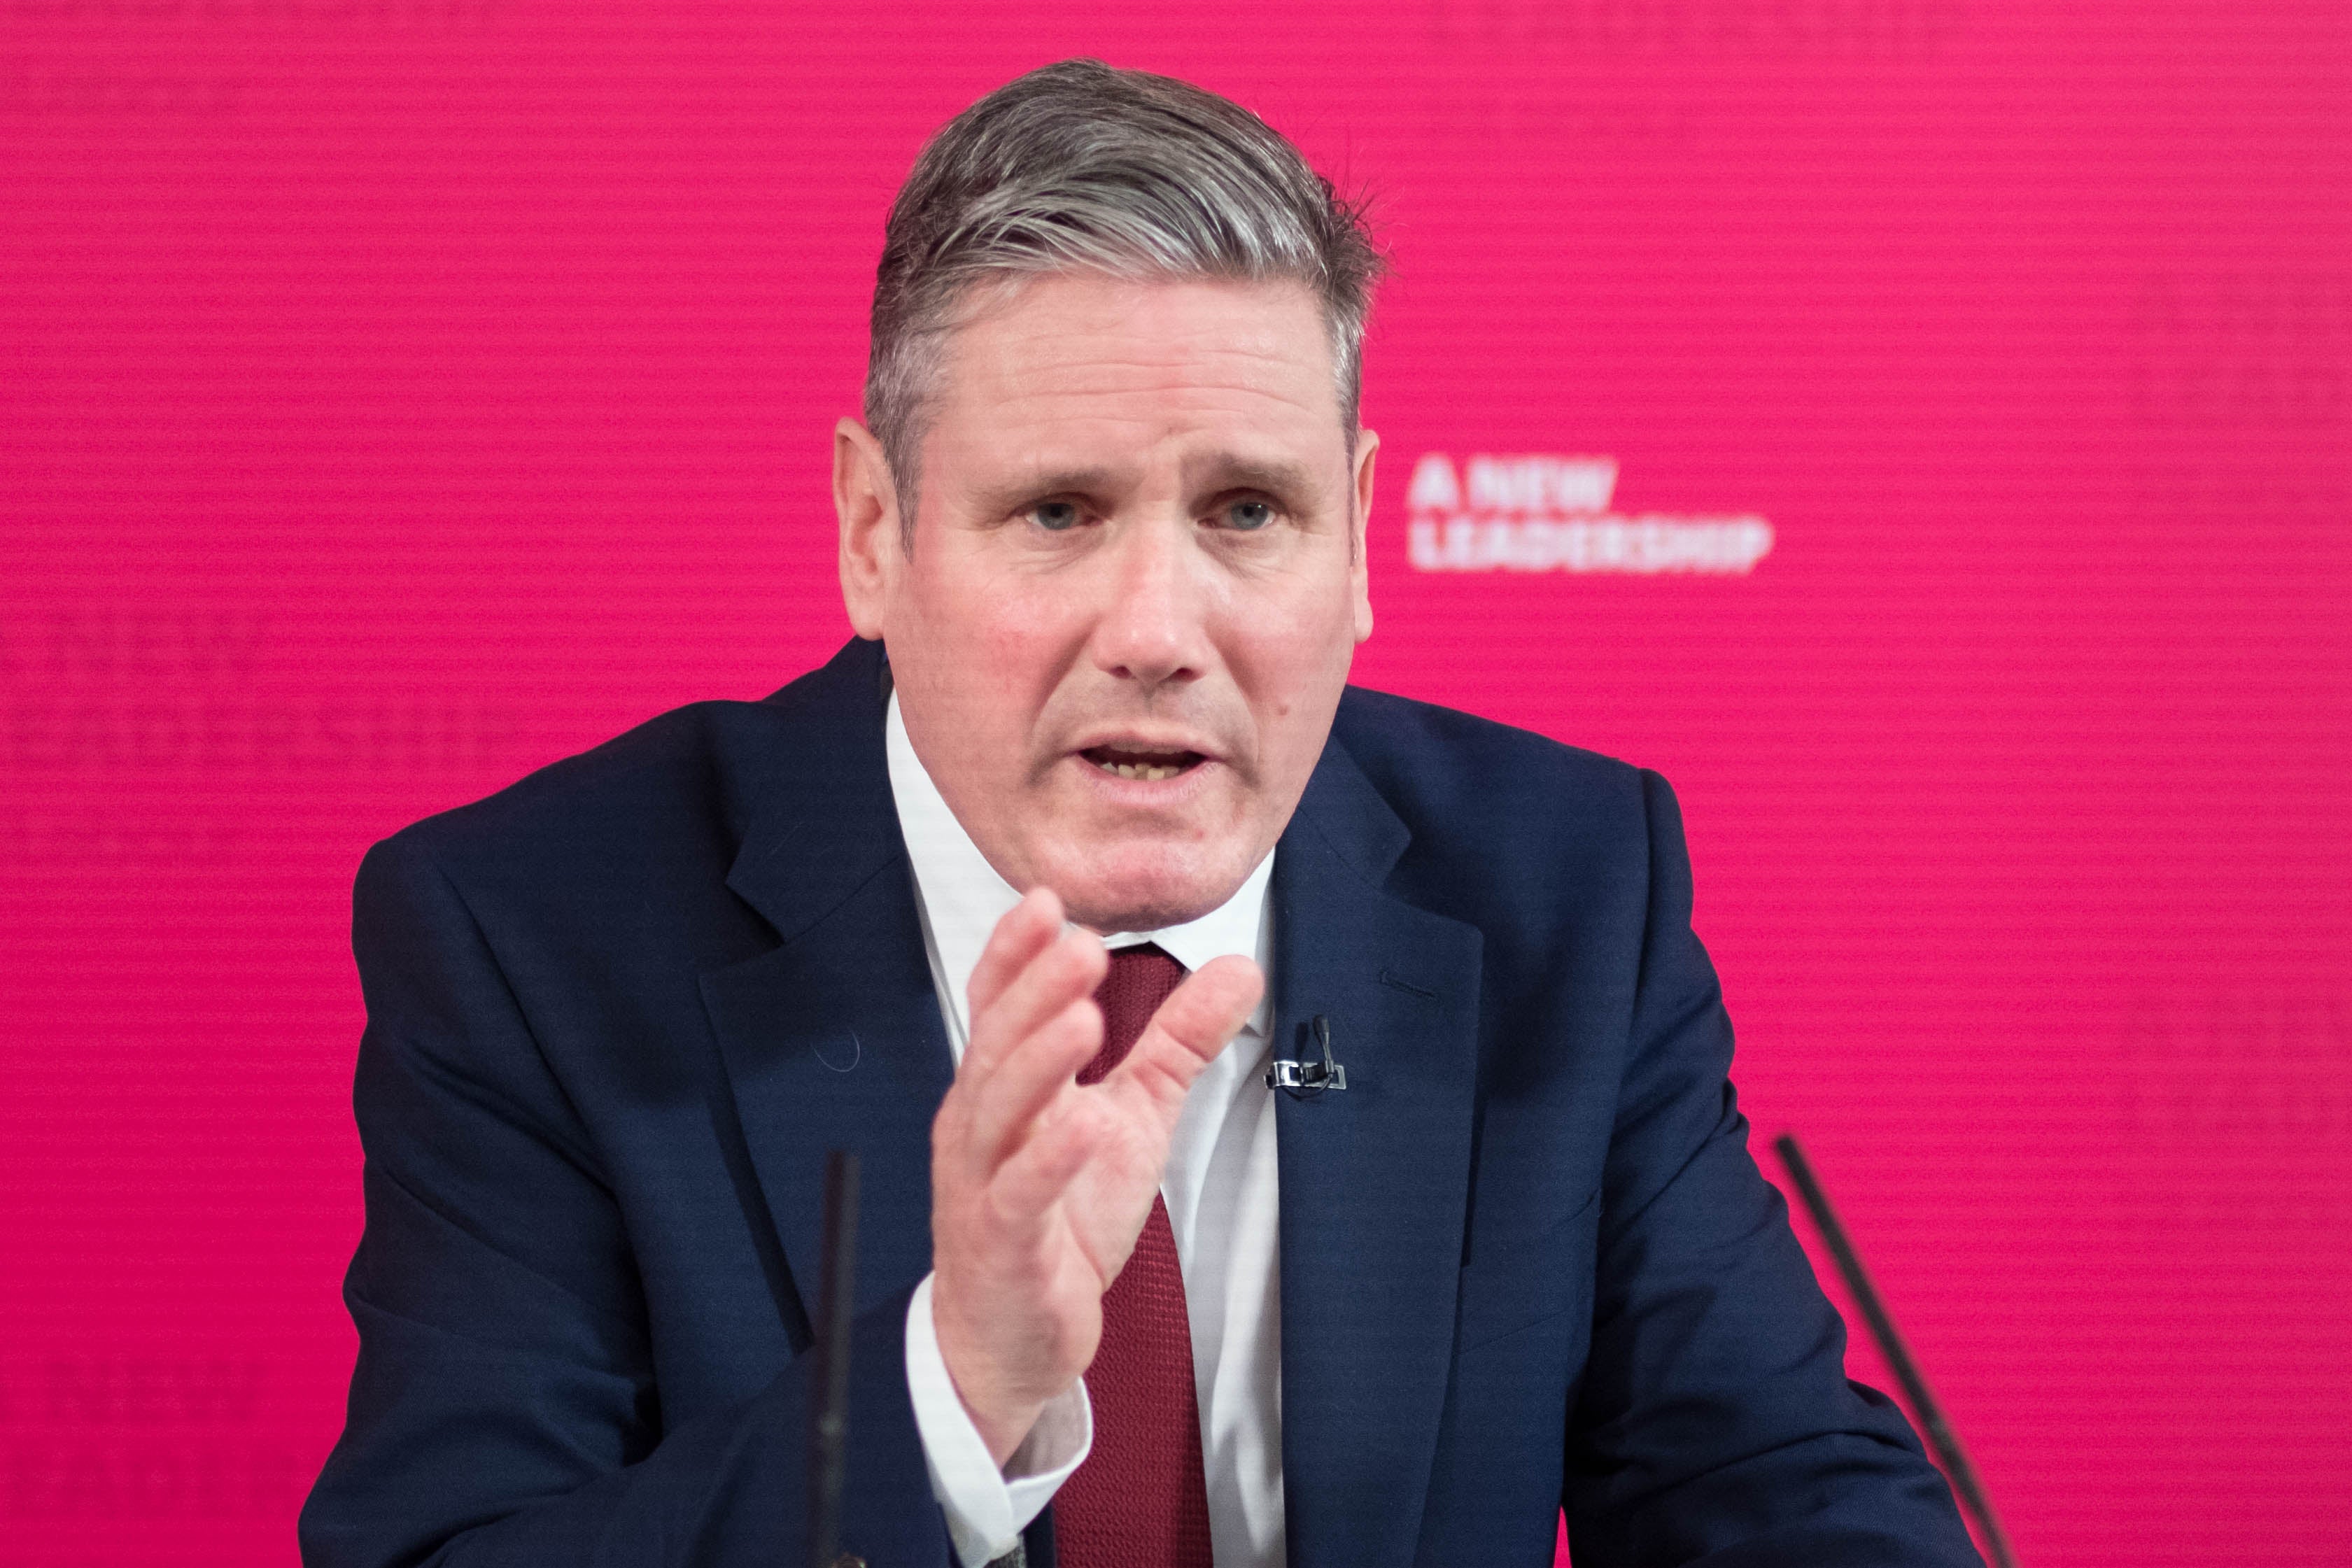 Starmer has called for decisive leadership